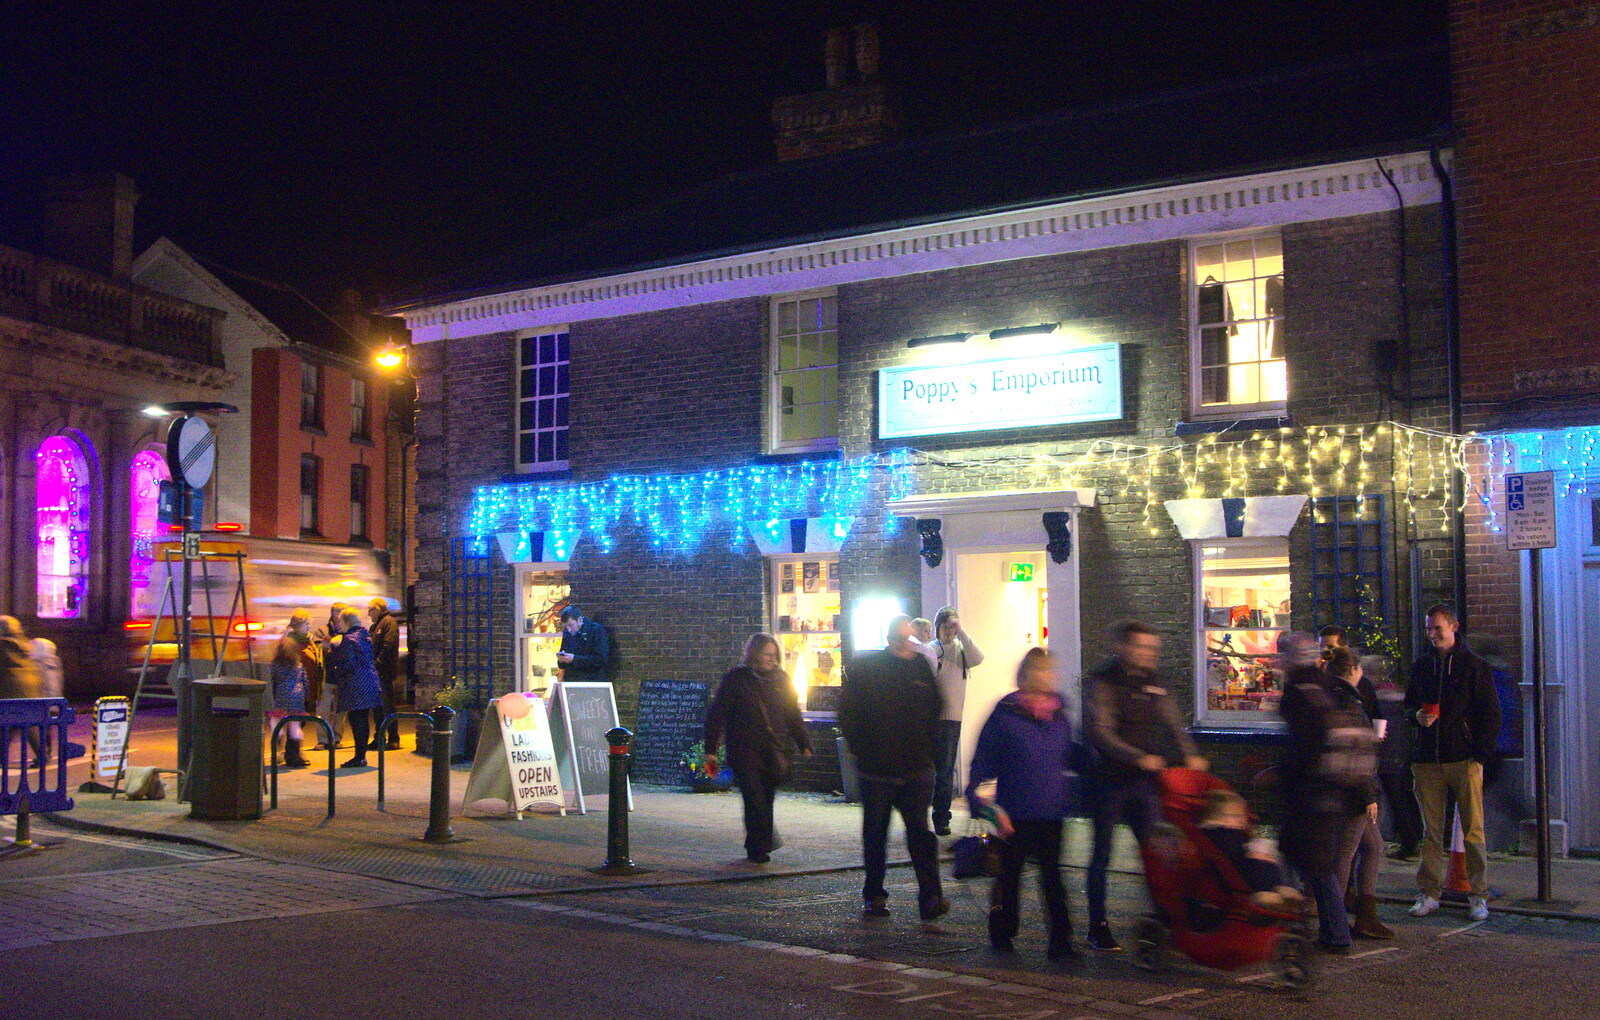 Poppy's Emporium from The Eye Christmas Lights, and a Trip to Norwich, Norfolk - 4th December 2015